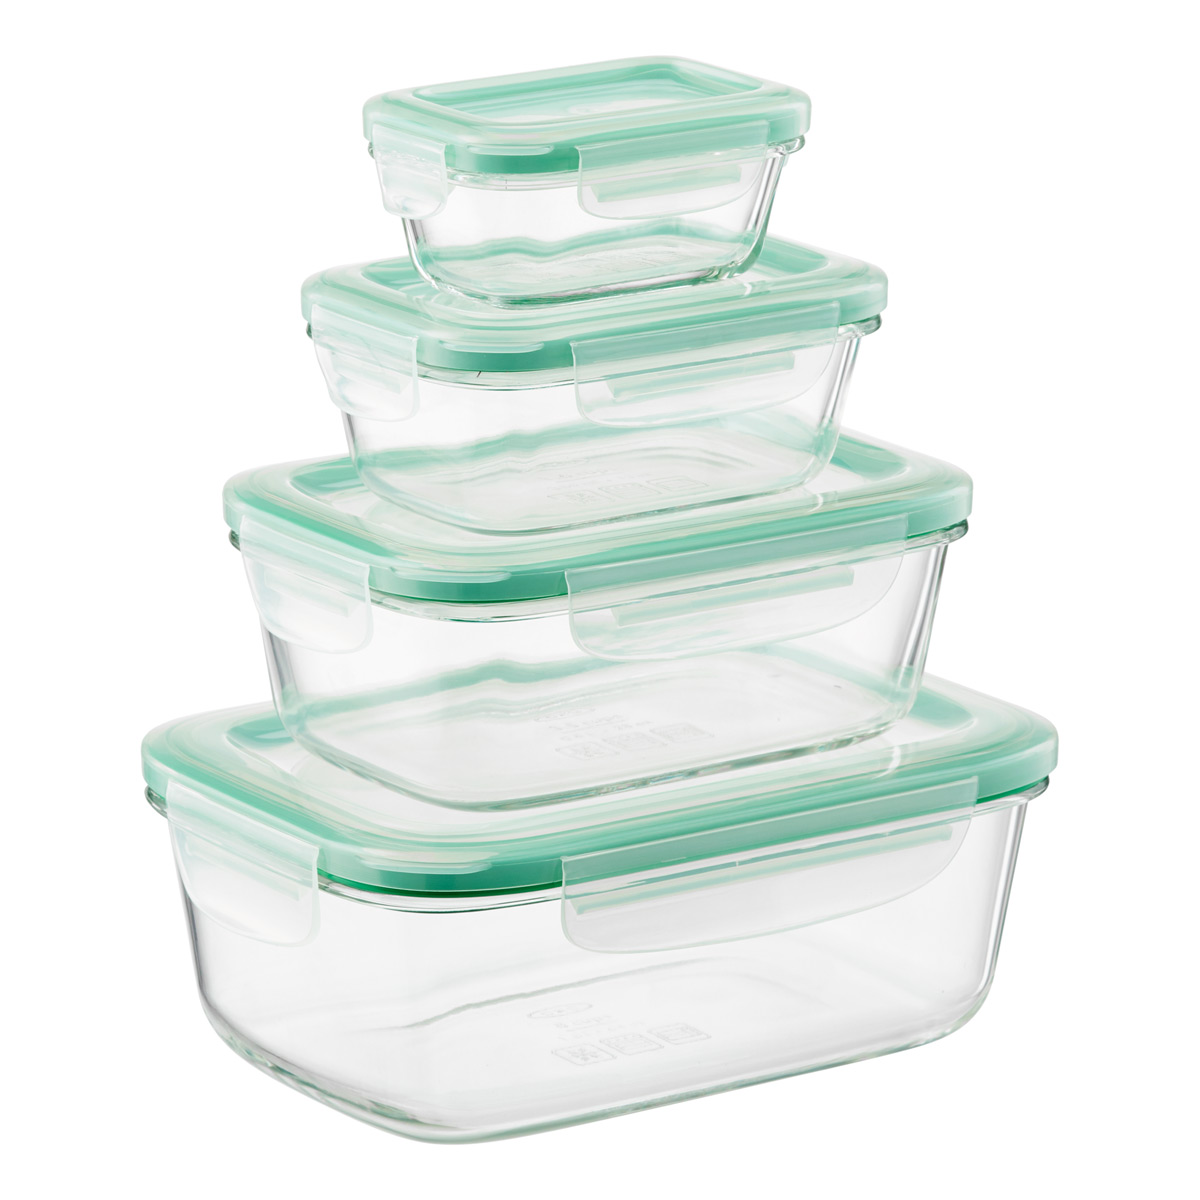 Details about   OXO 8 Piece Smart Seal Glass Round Container Set leak proof lid*FREE SHIPPING* 